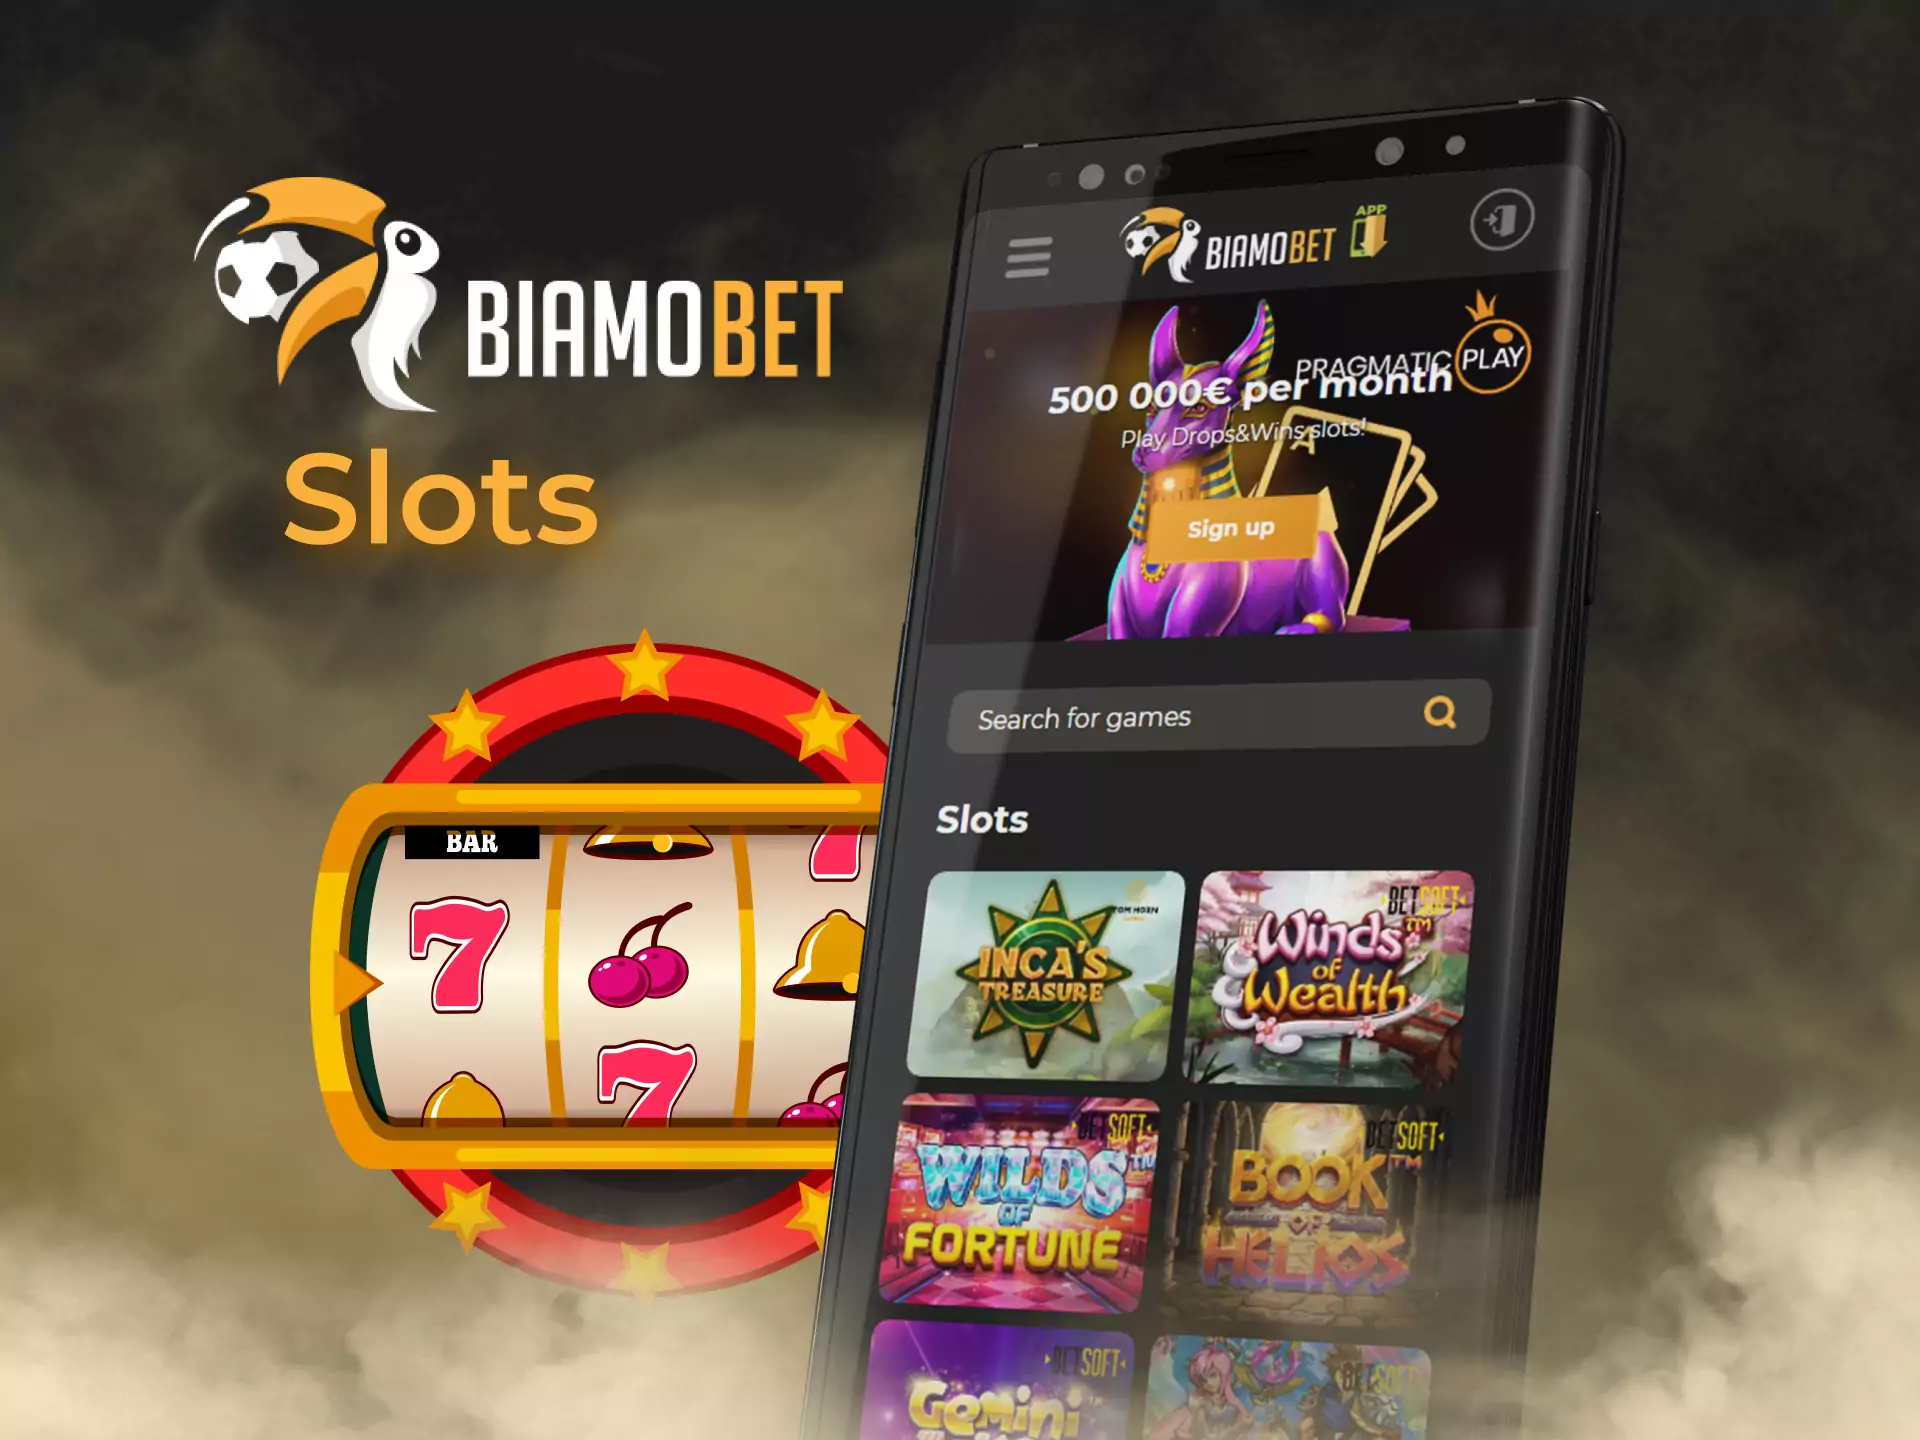 Amazing slots are always available for playing in the Biamobet app.